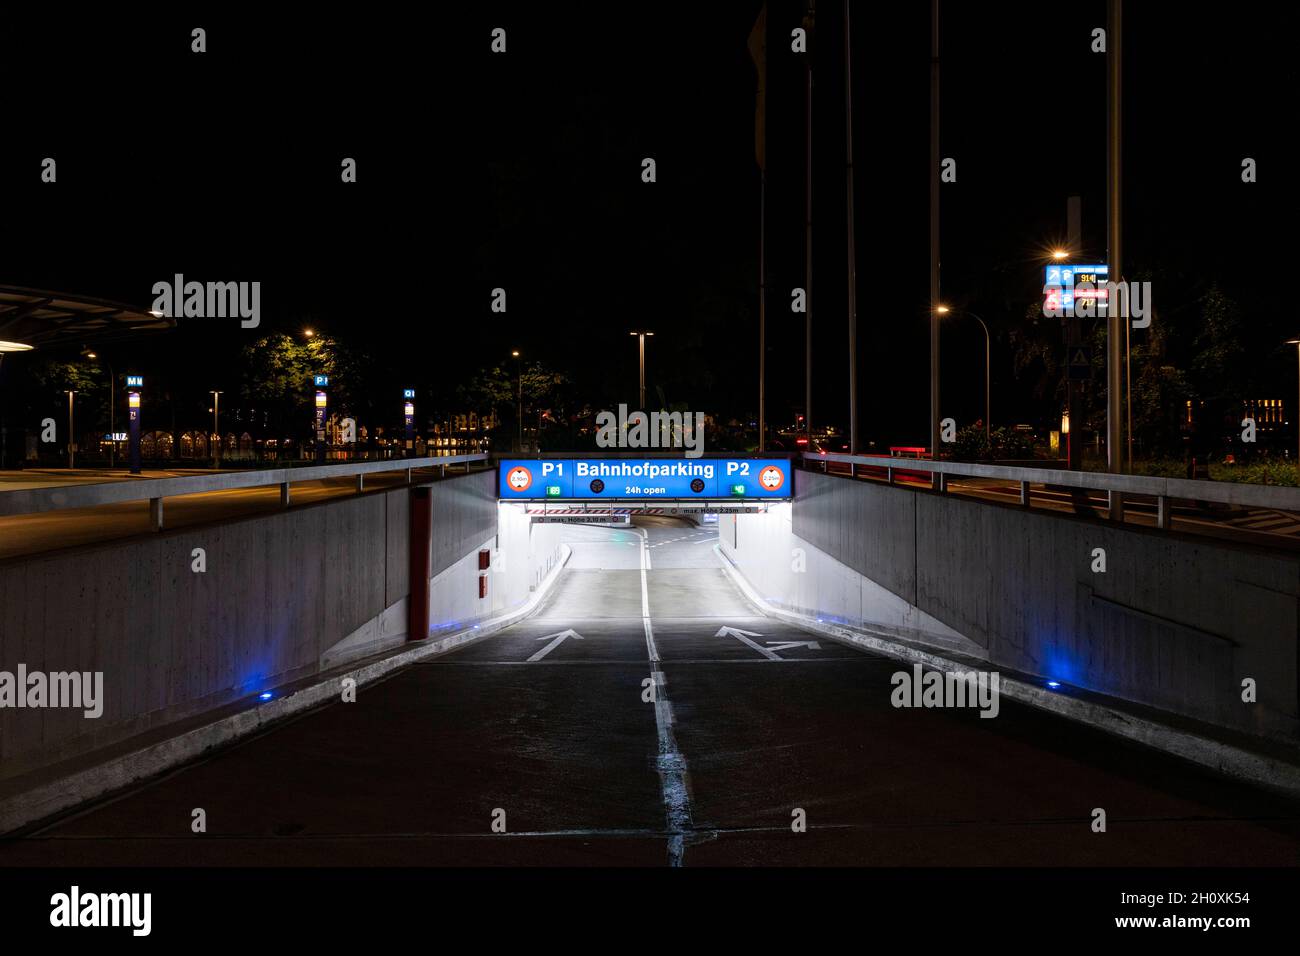 Underground car park entrance with german inscriptions in Luzern. Night view, illuminated by lights. Street signs on the ground. Nobody inside Stock Photo